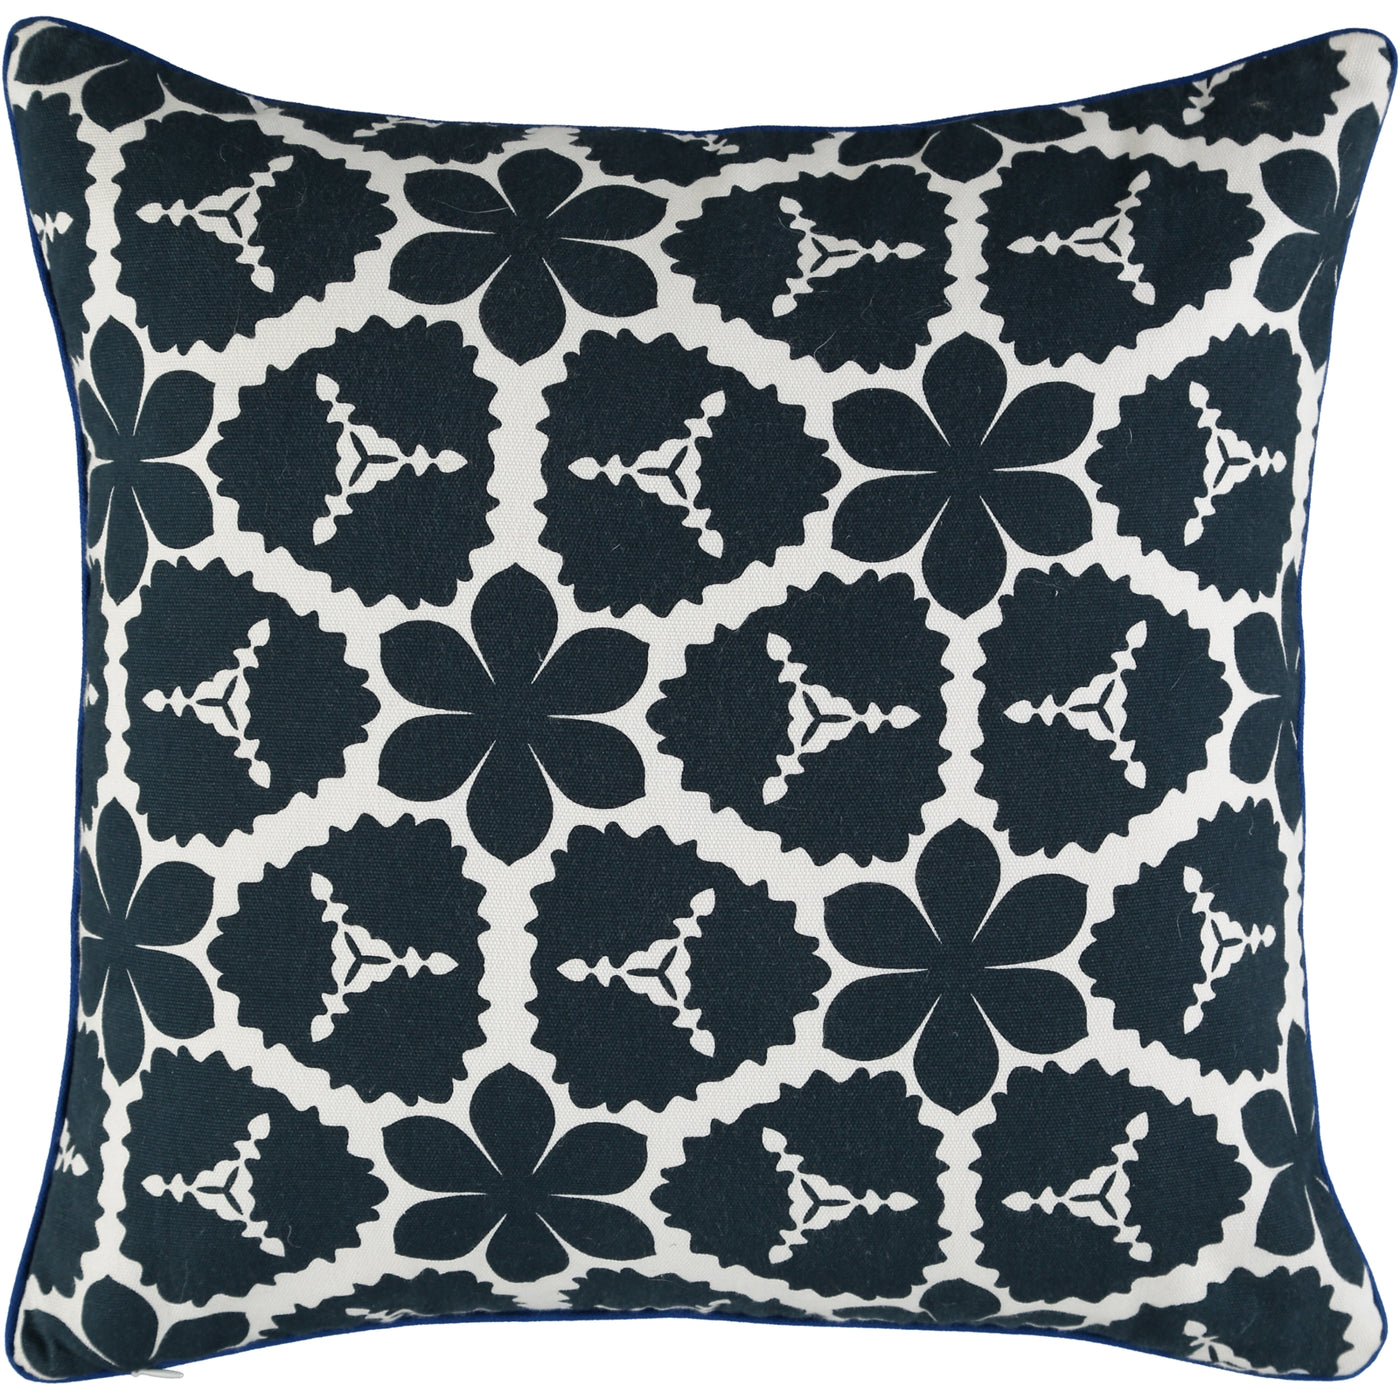 Kitty-Holmes-blue-and-white-cushion-cover-large-cutout-pattern